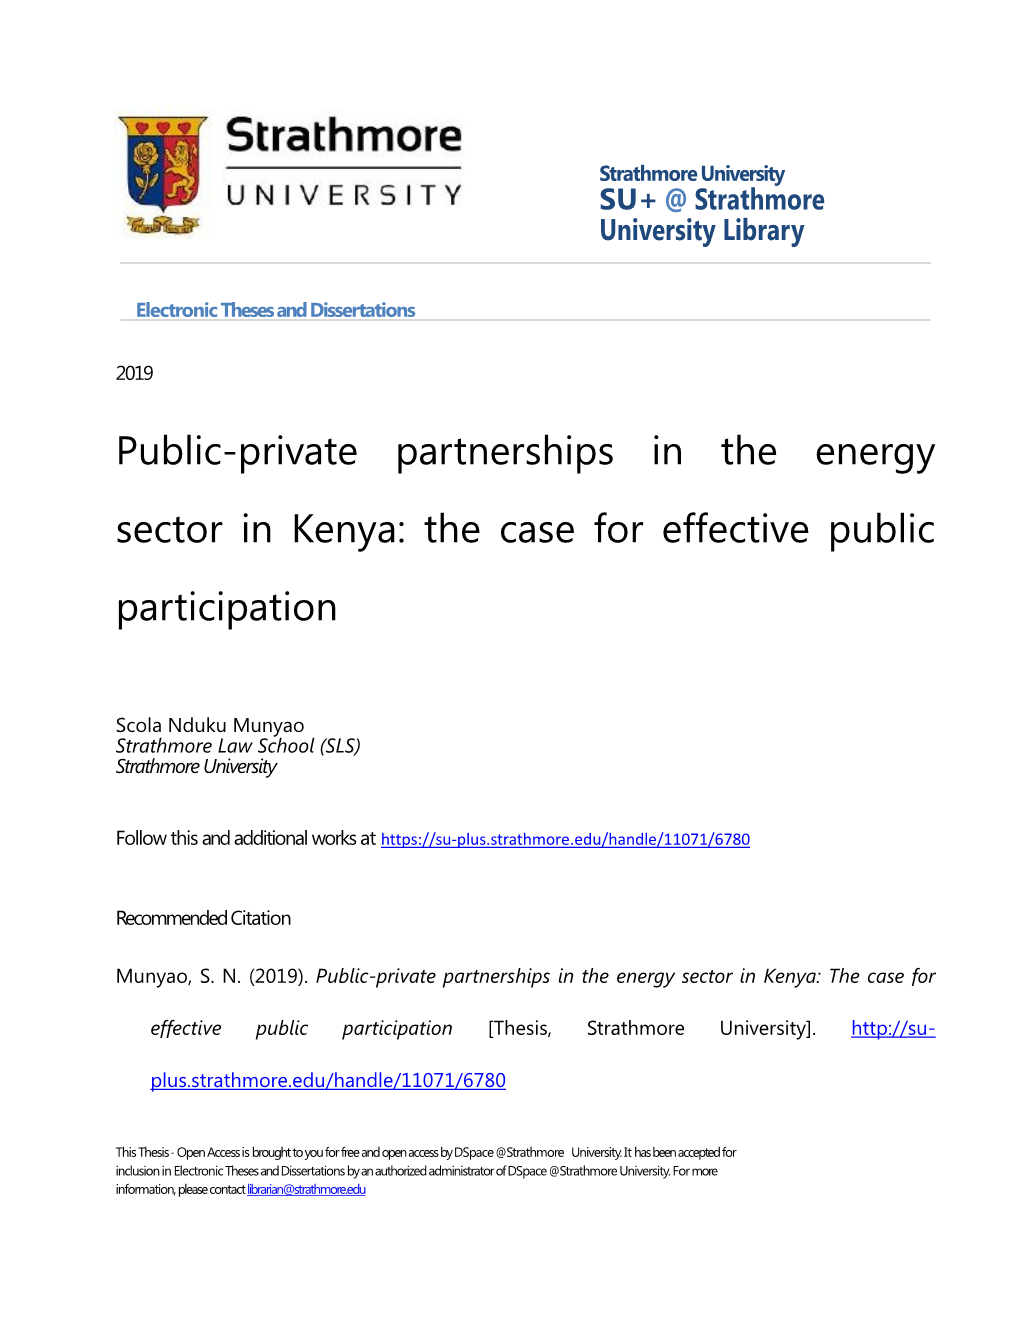 Public-Private Partnerships in the Energy Sector in Kenya: the Case for Effective Public Participation